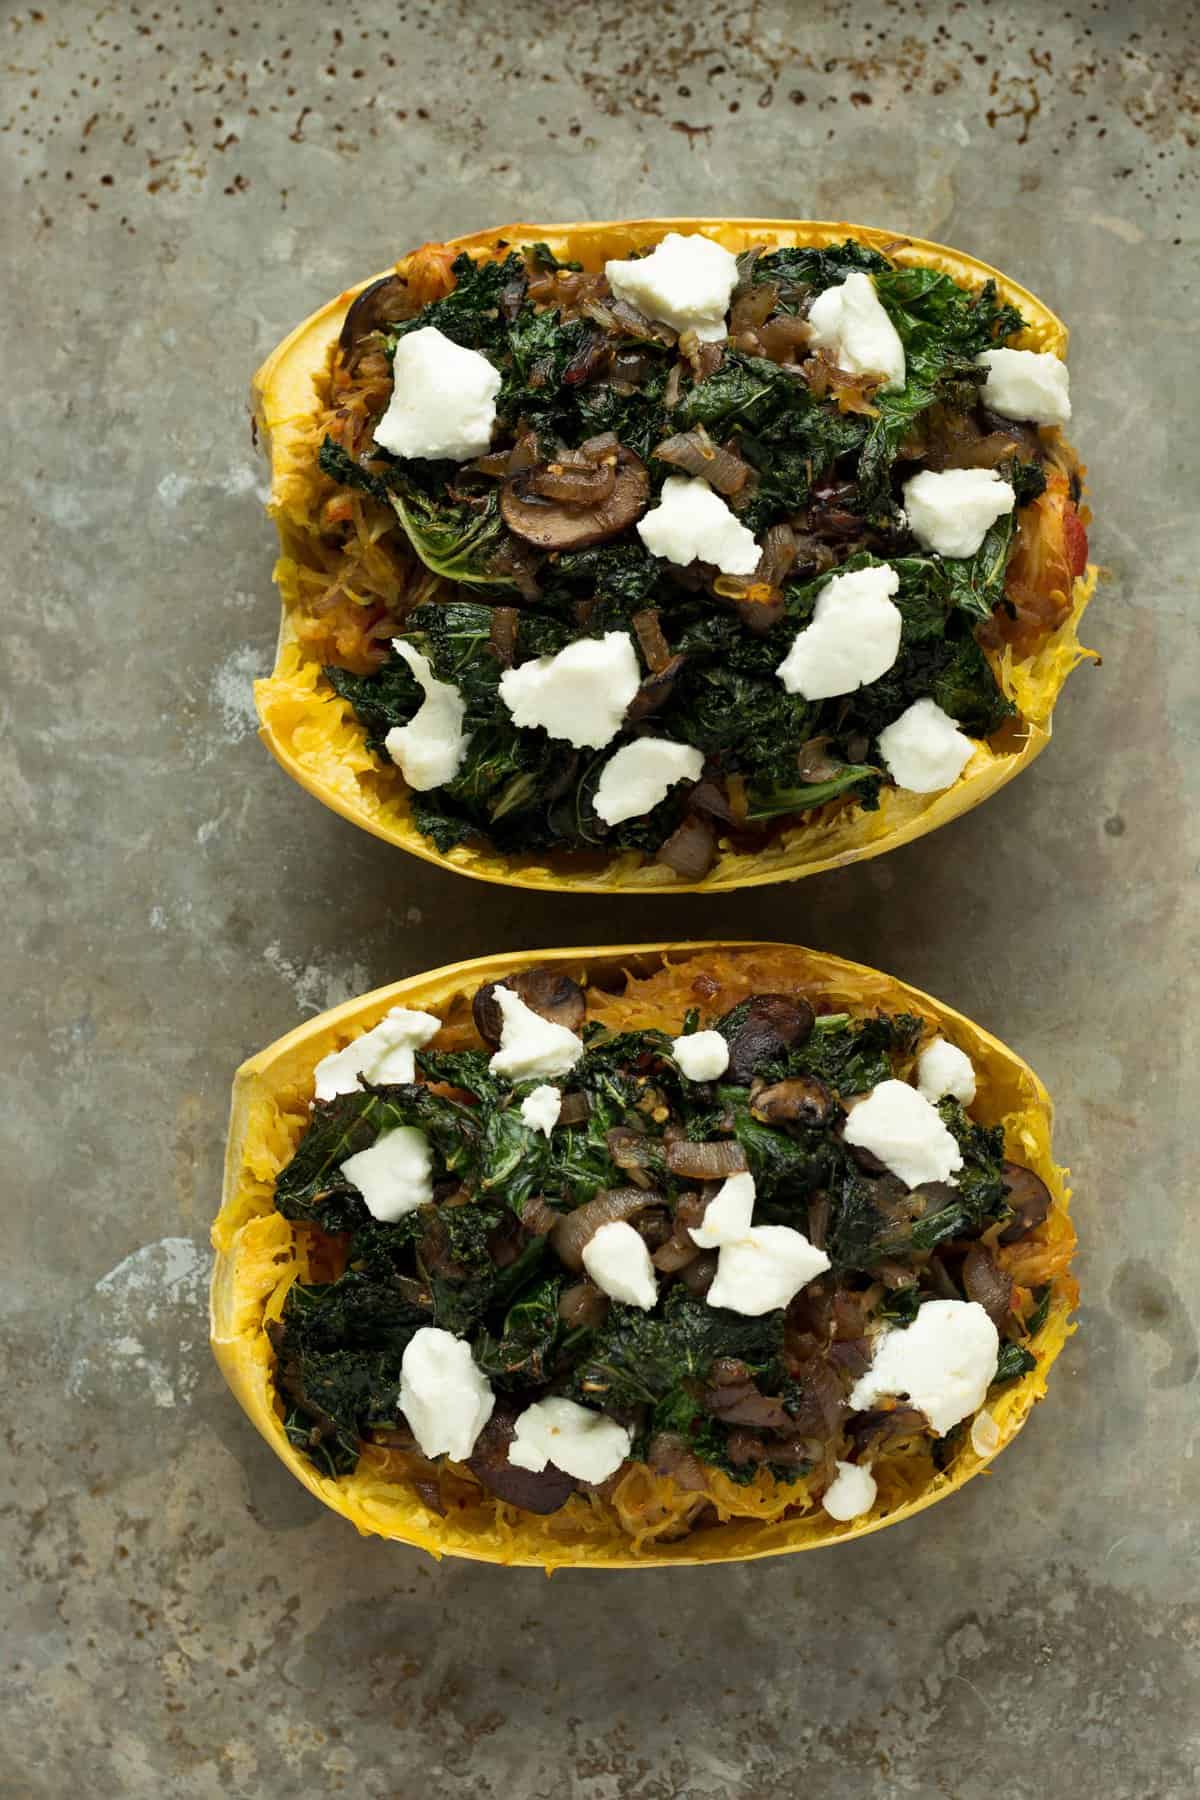 These veggie spaghetti squash boats are vegetarian, with kale, mushrooms and goat cheese. So packed with flavor and super healthy!